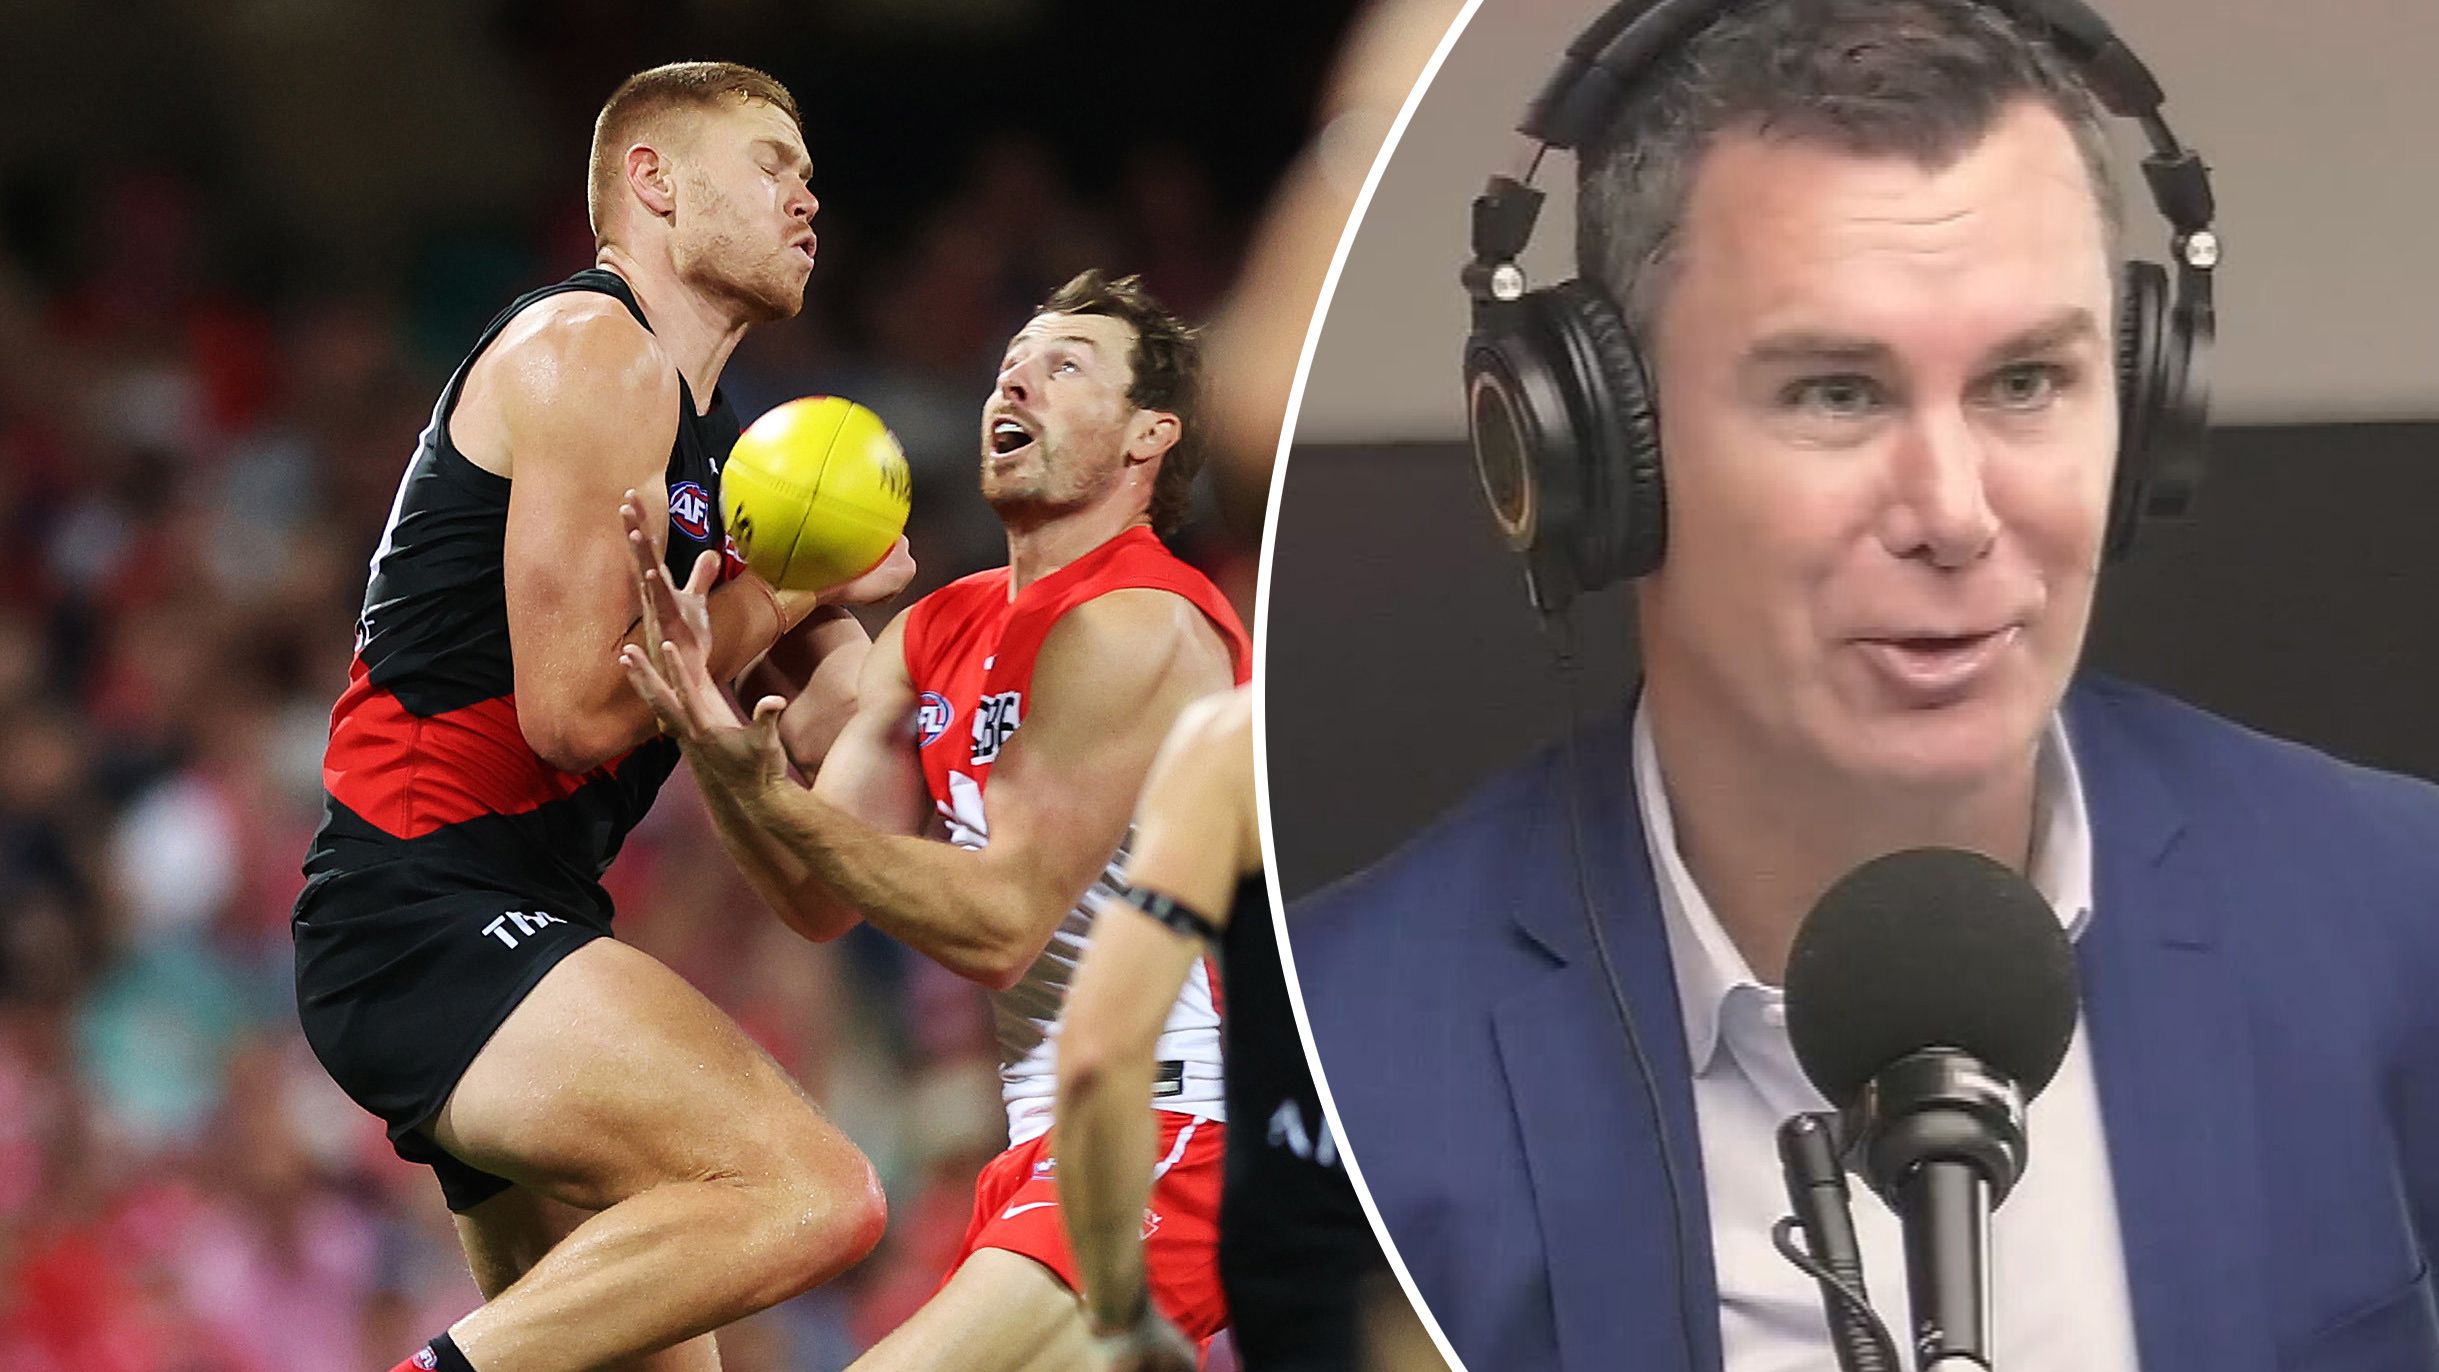 'It's a waste of time': AFL legend vows to 'not watch footy' after Essendon star suspended